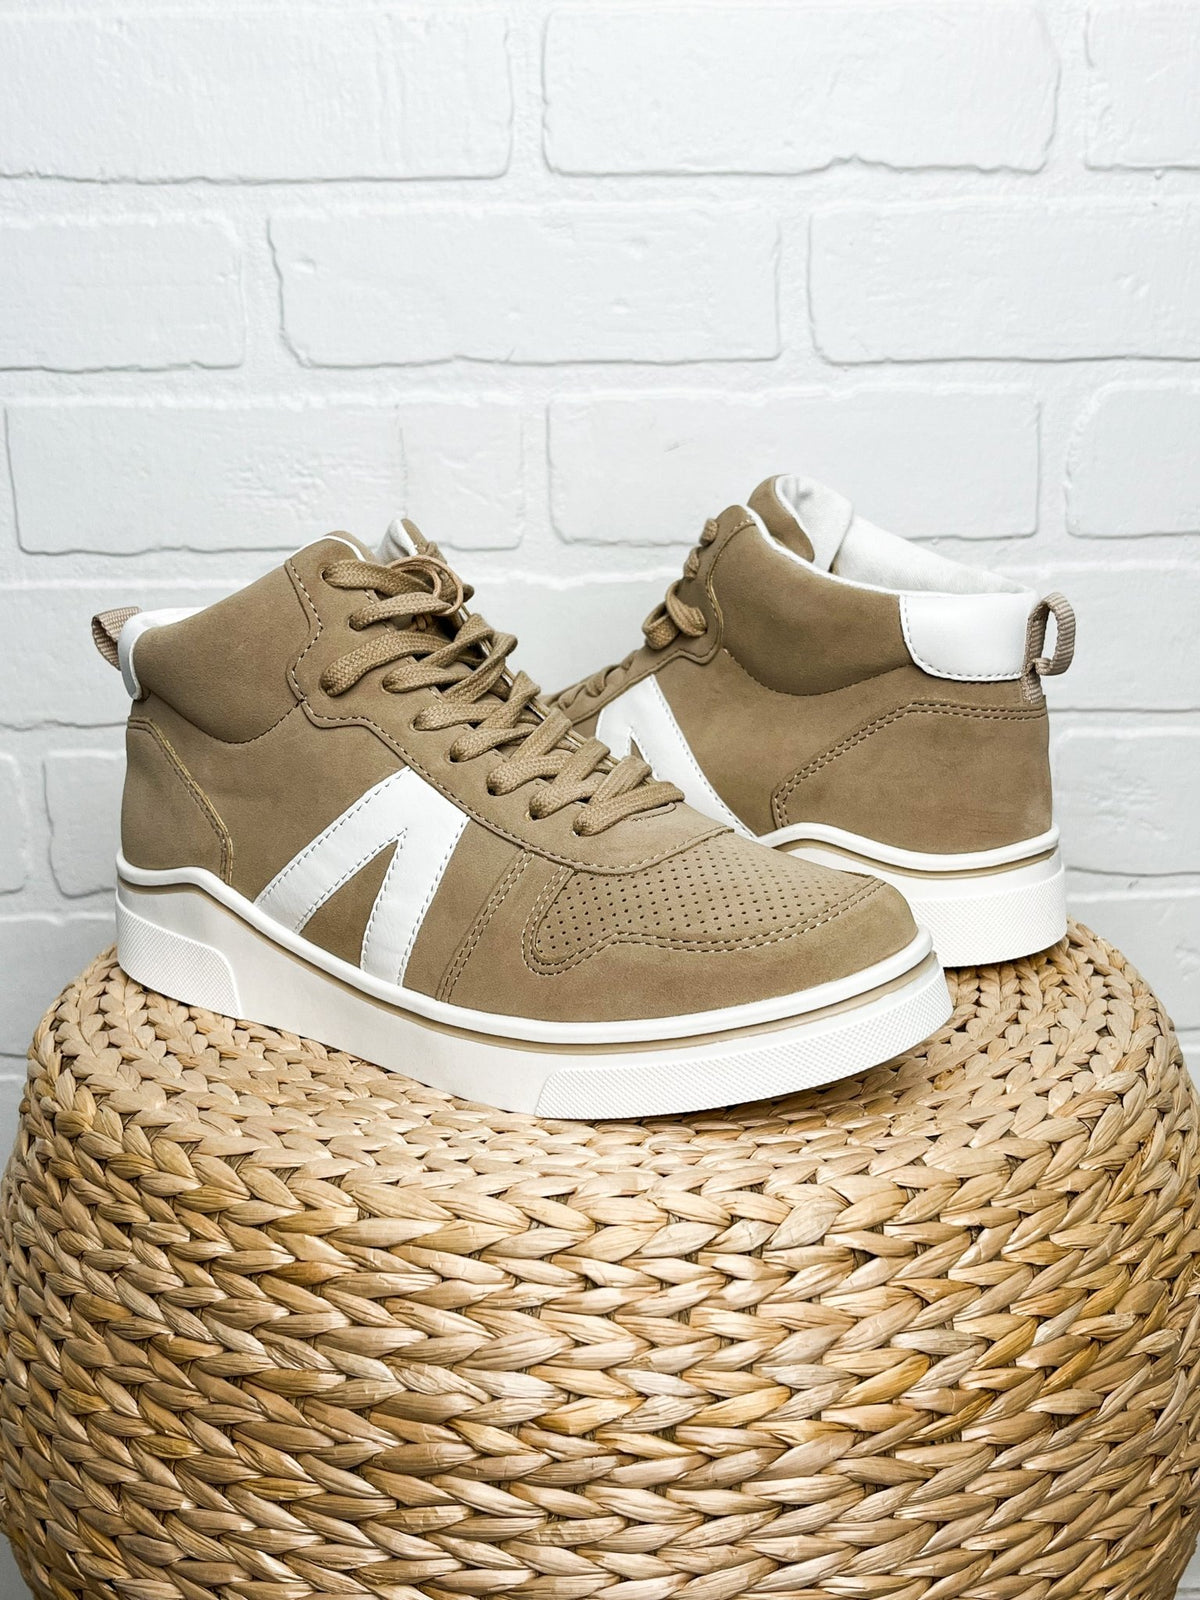 Gio high top sneaker sand/white - Cute Shoes - Trendy Shoes at Lush Fashion Lounge Boutique in Oklahoma City